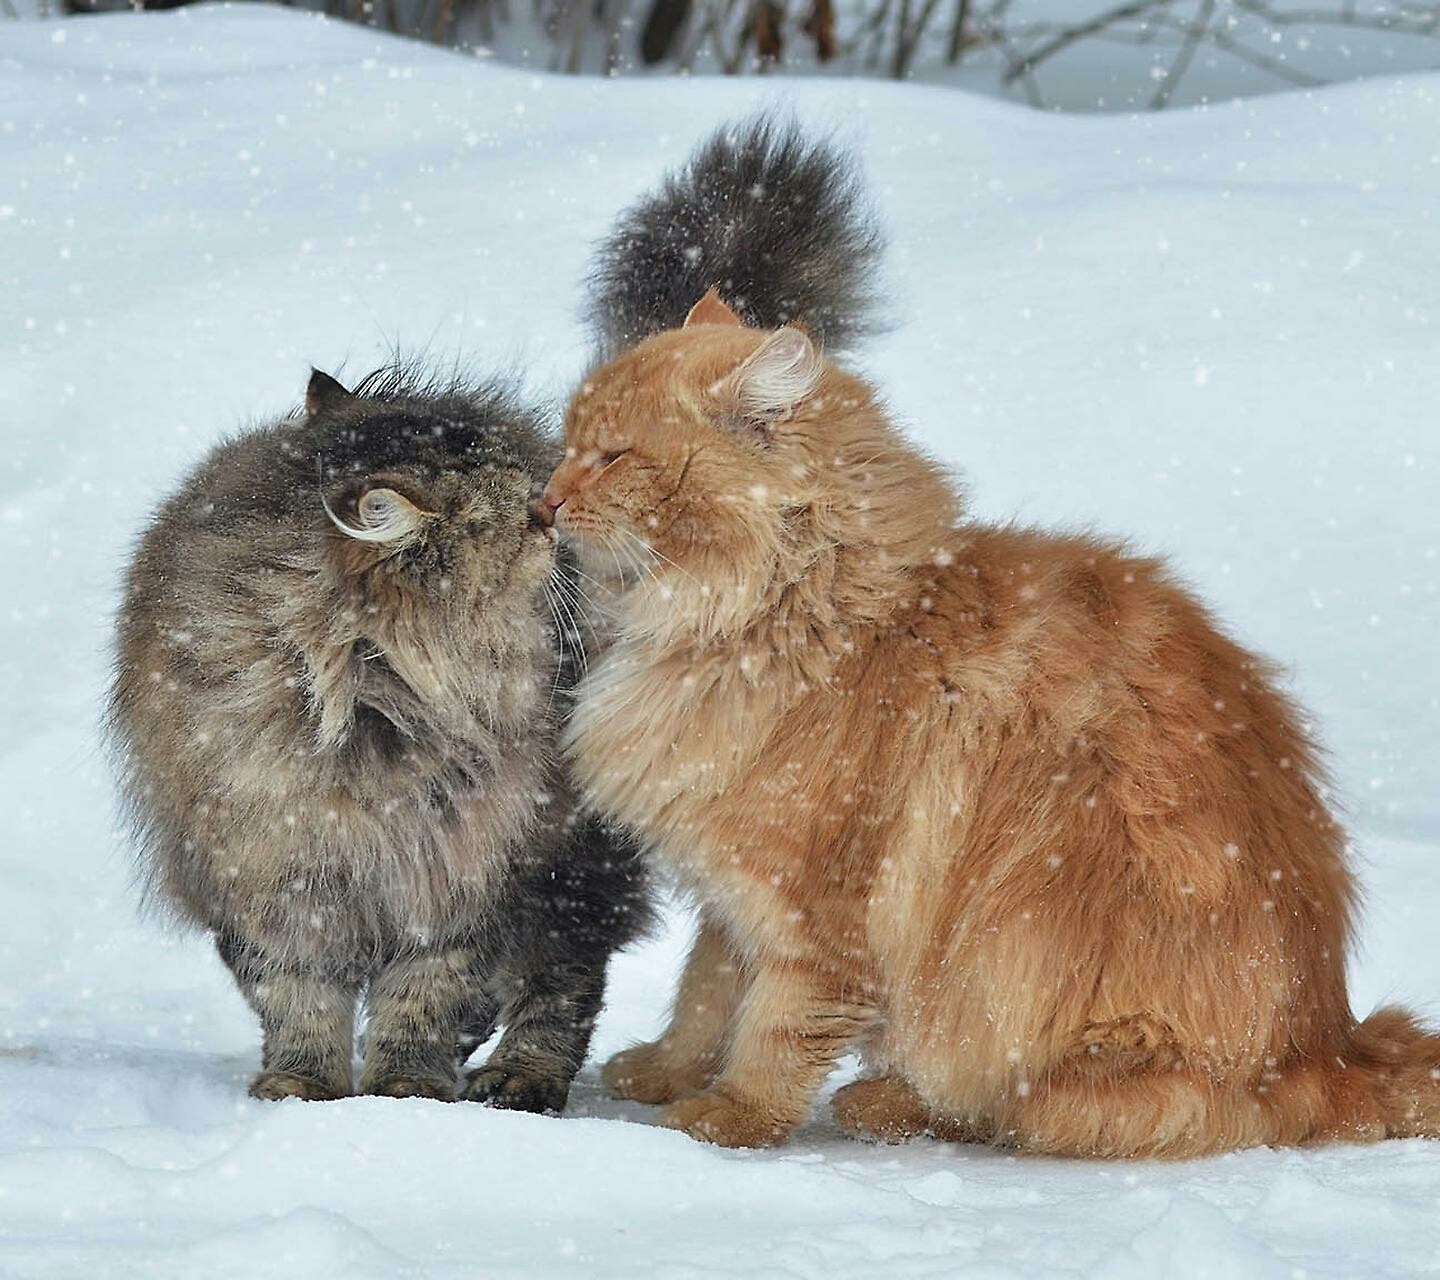 General 1440x1280 cats animals mammals snow winter cold outdoors